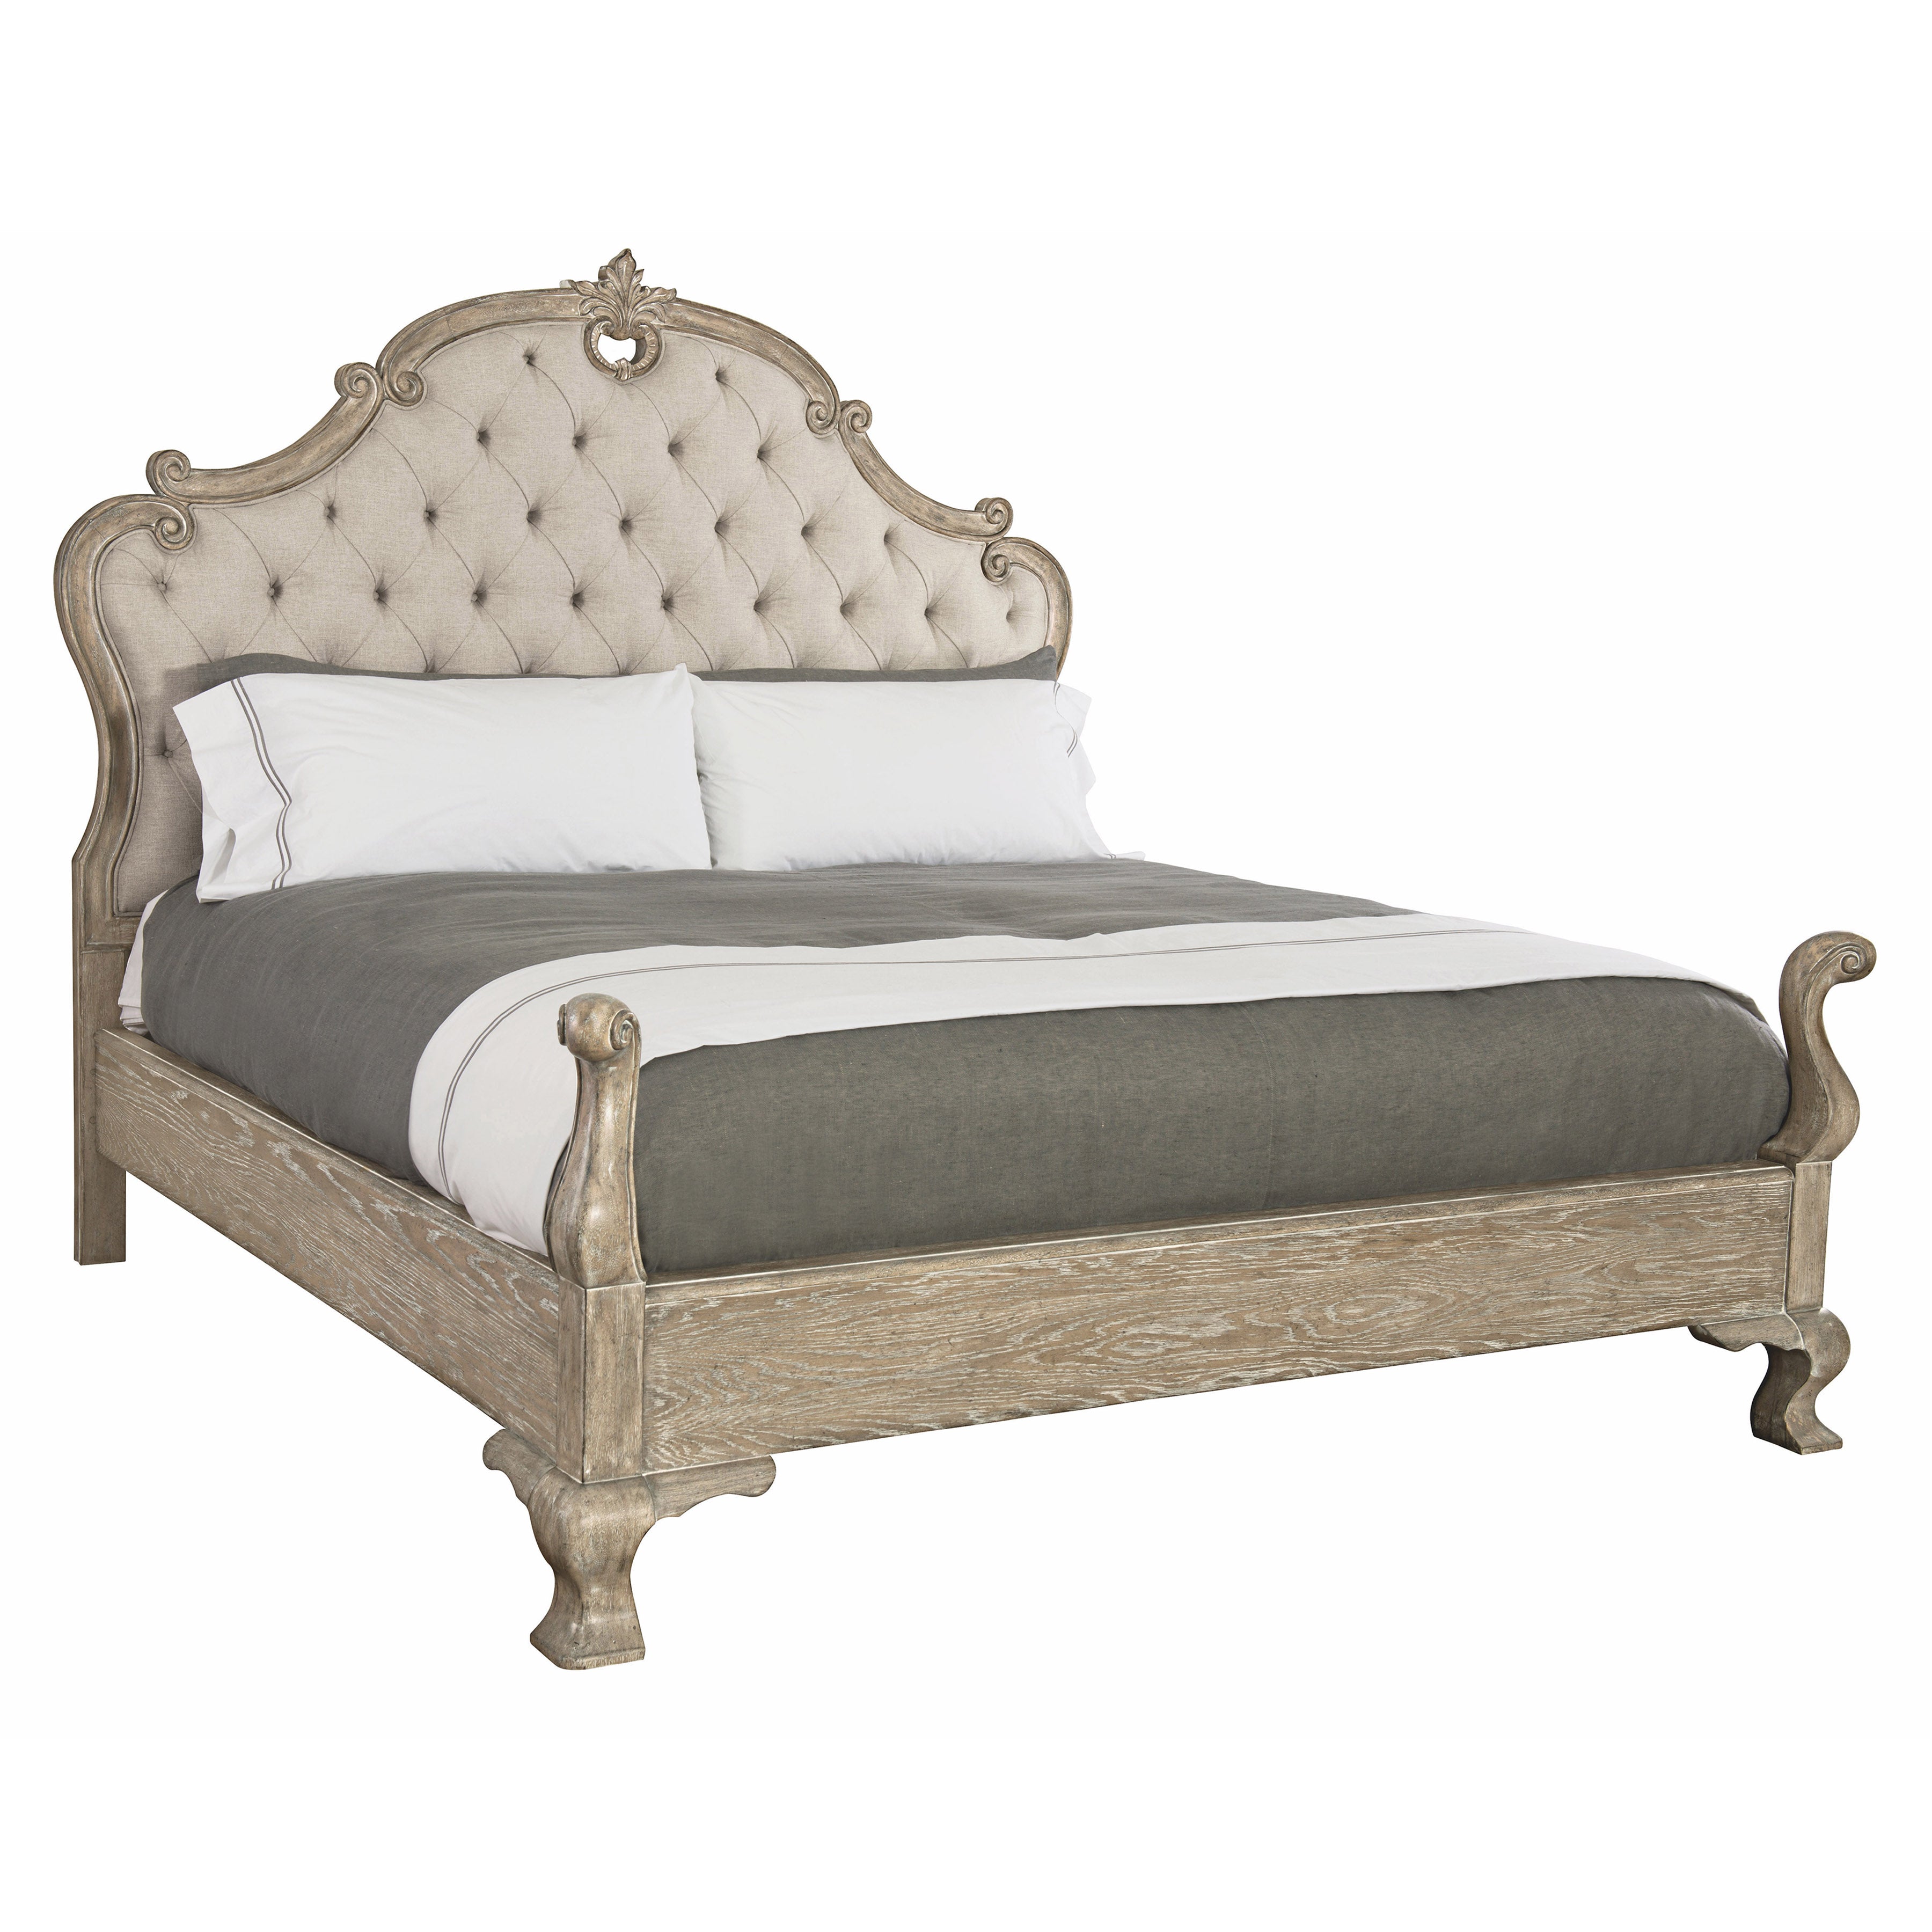 Campania Upholstered King Panel Bed